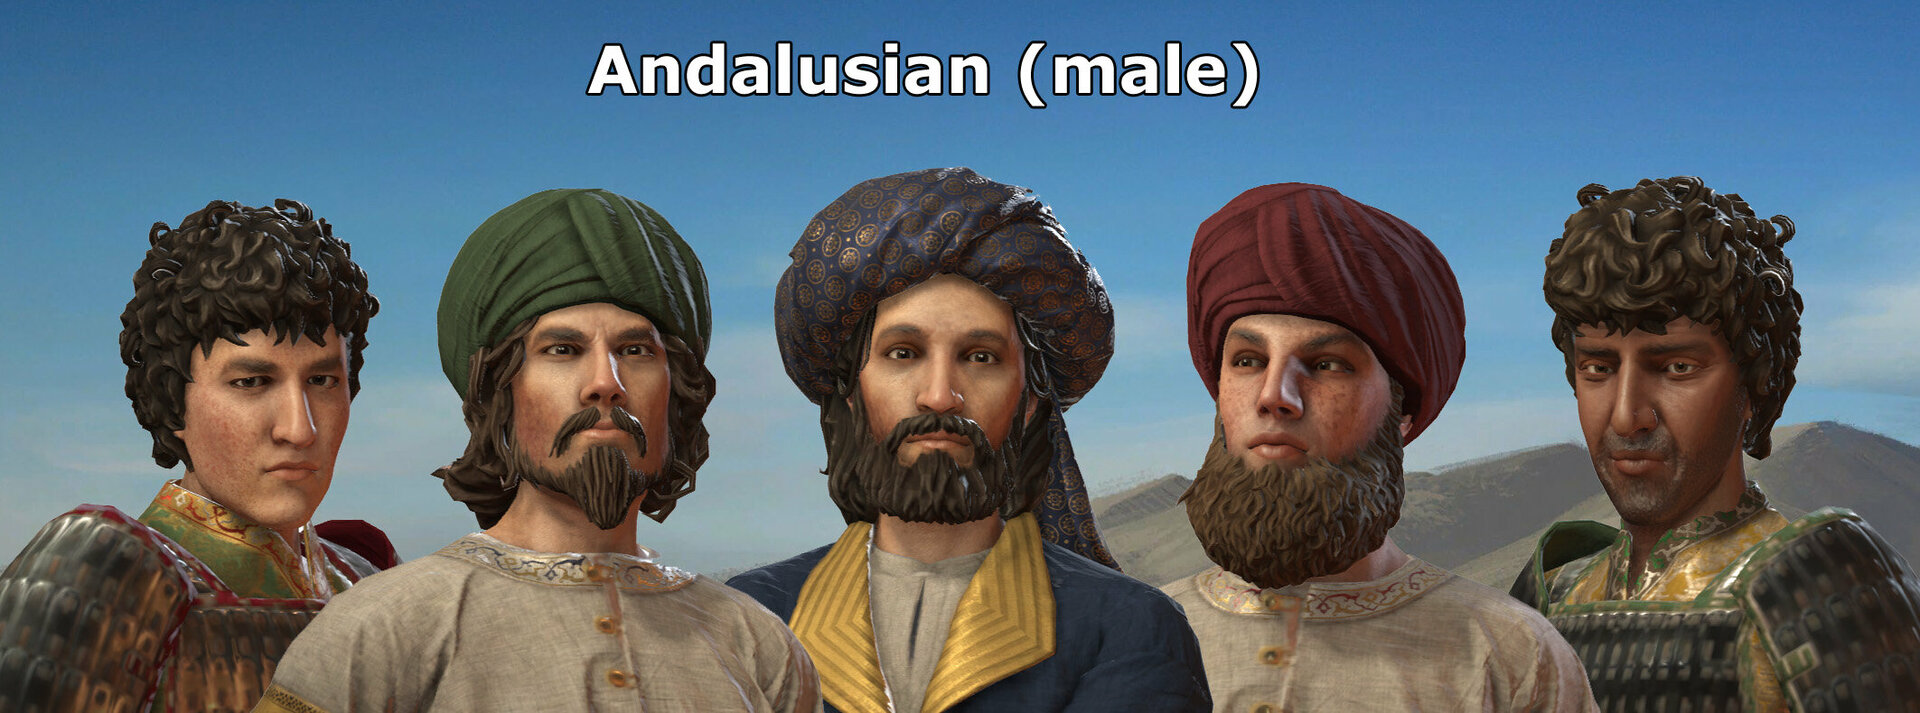 andalusian_male.thumb.jpg.8bfdab681a040cdd4ee5be80edf609d2.jpg